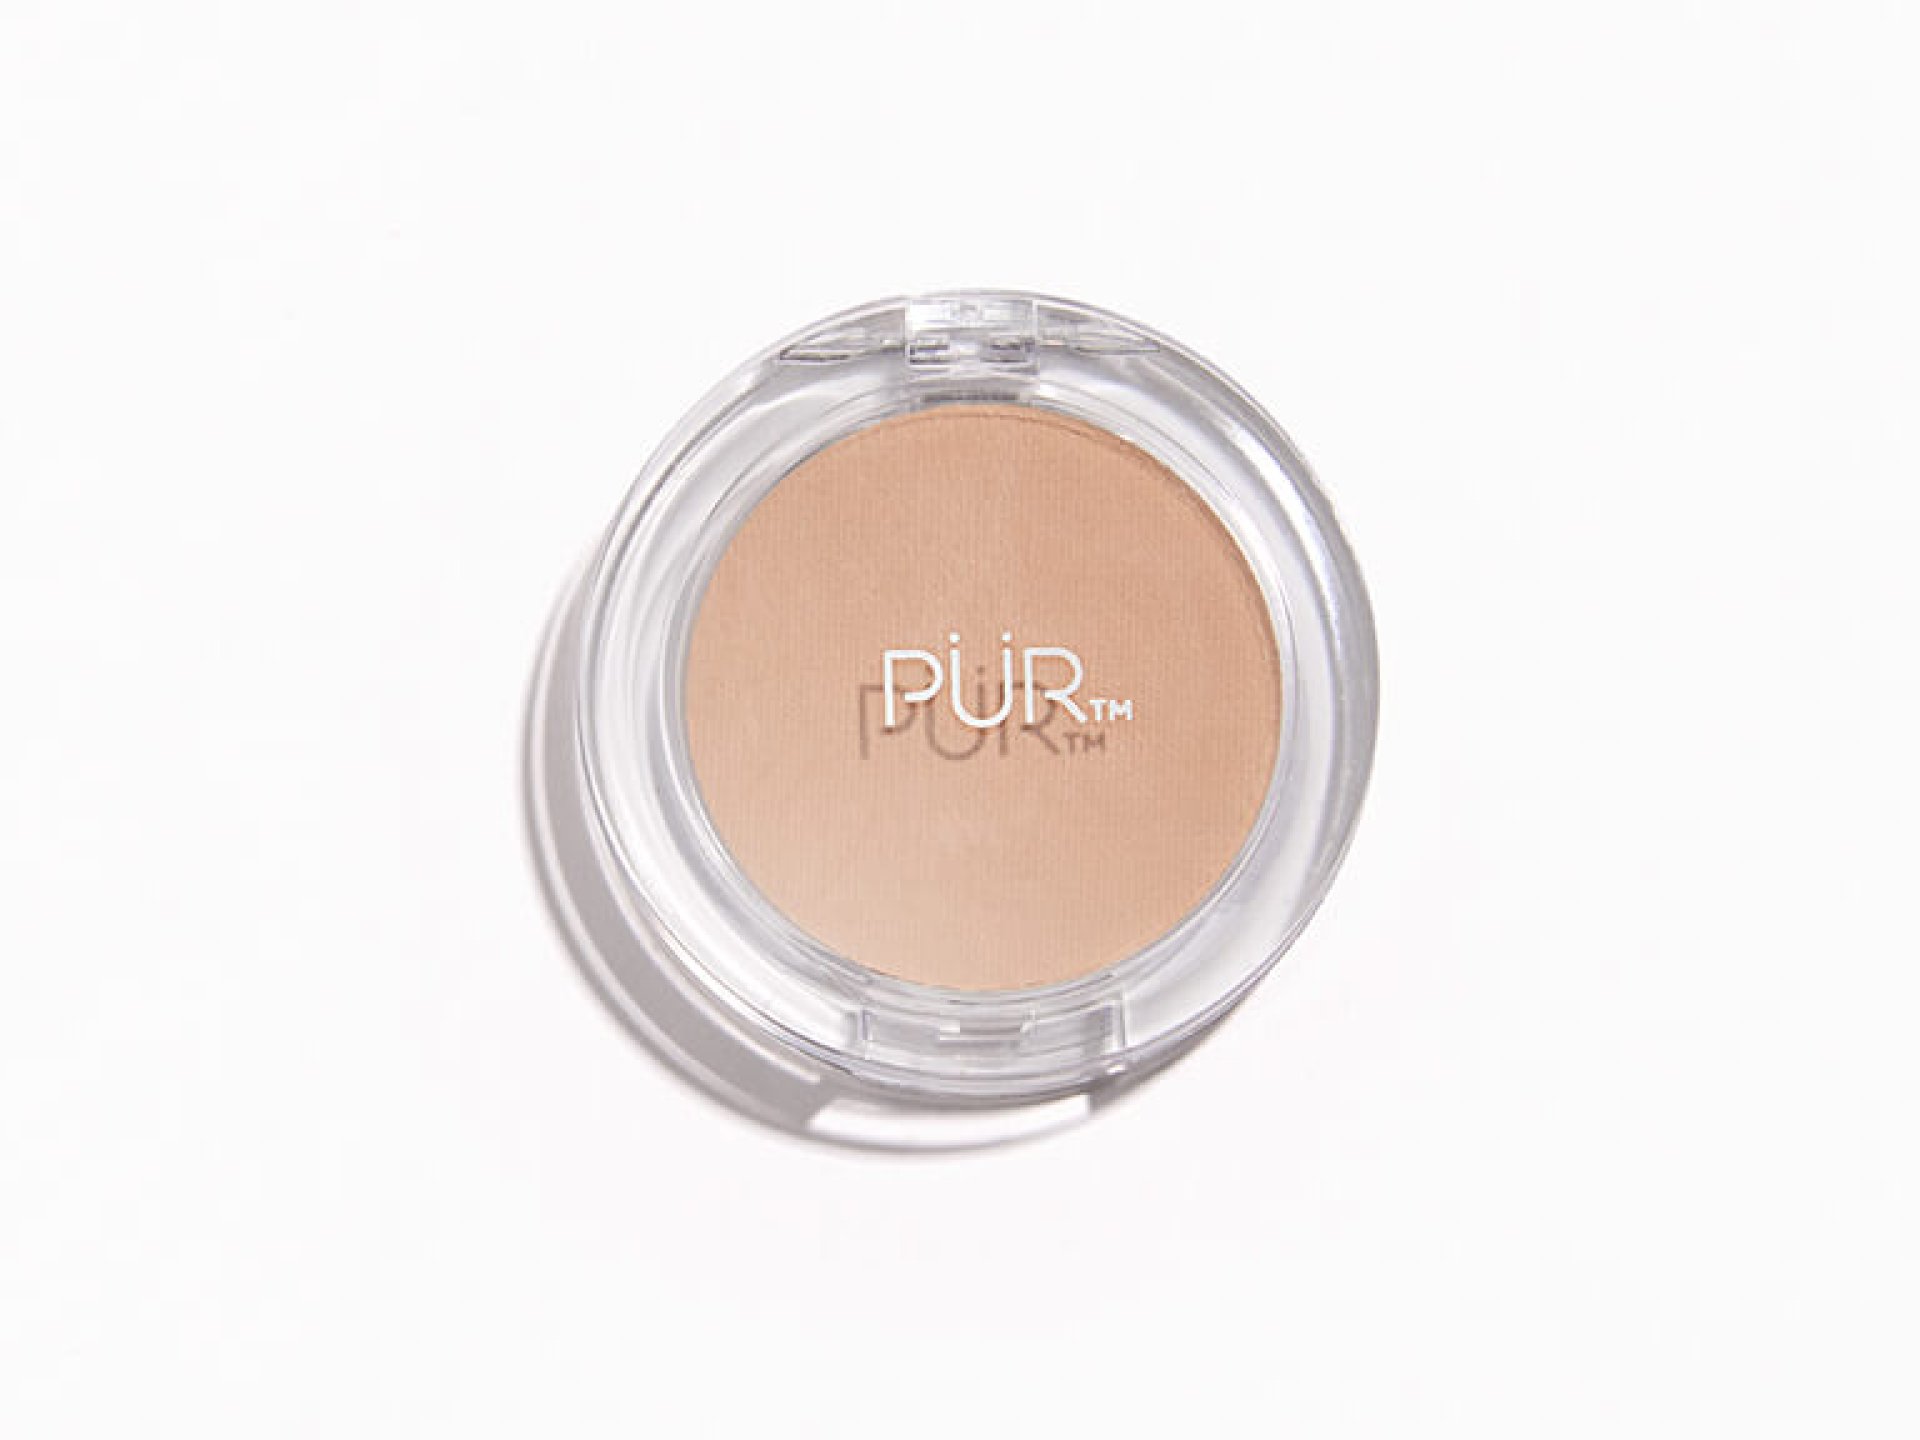 PUR 4-in-1 Pressed Mineral Makeup Broad Spectrum SPF 15 in Light